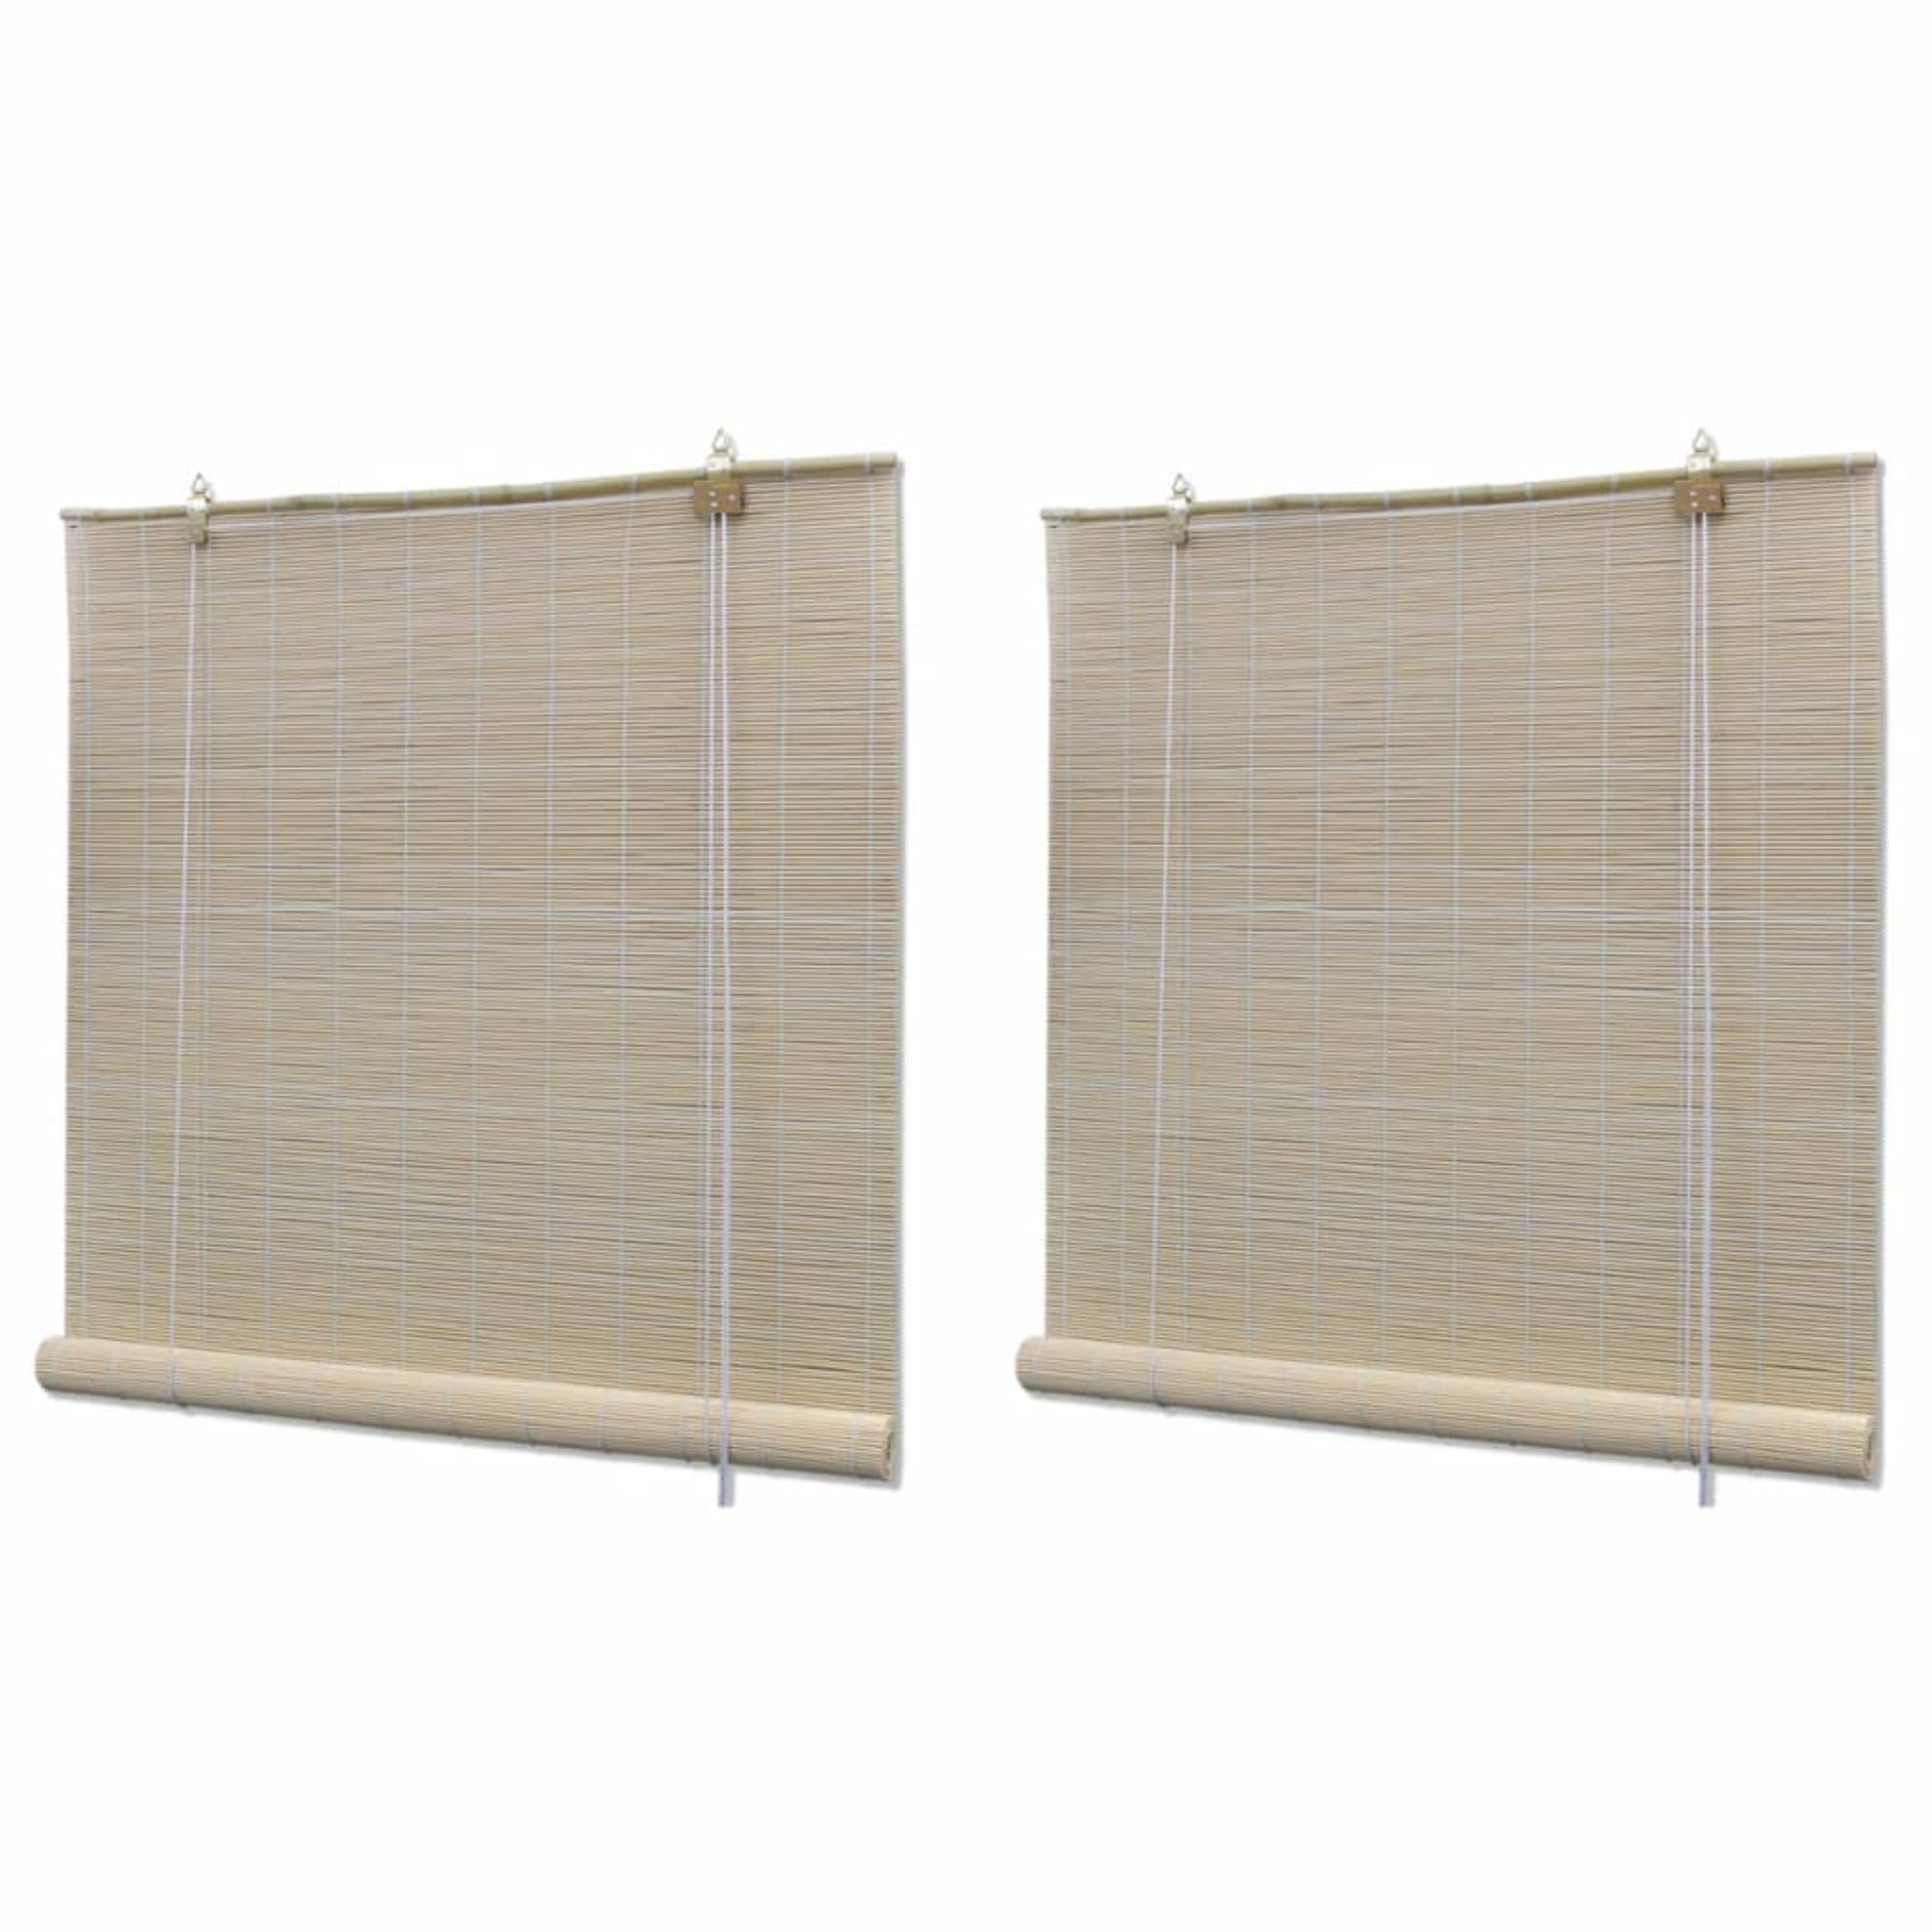 Details about   vidaXL Roller Blinds Bamboo Brown Home Blackout Sunshade Privacy Screen 39.4" 